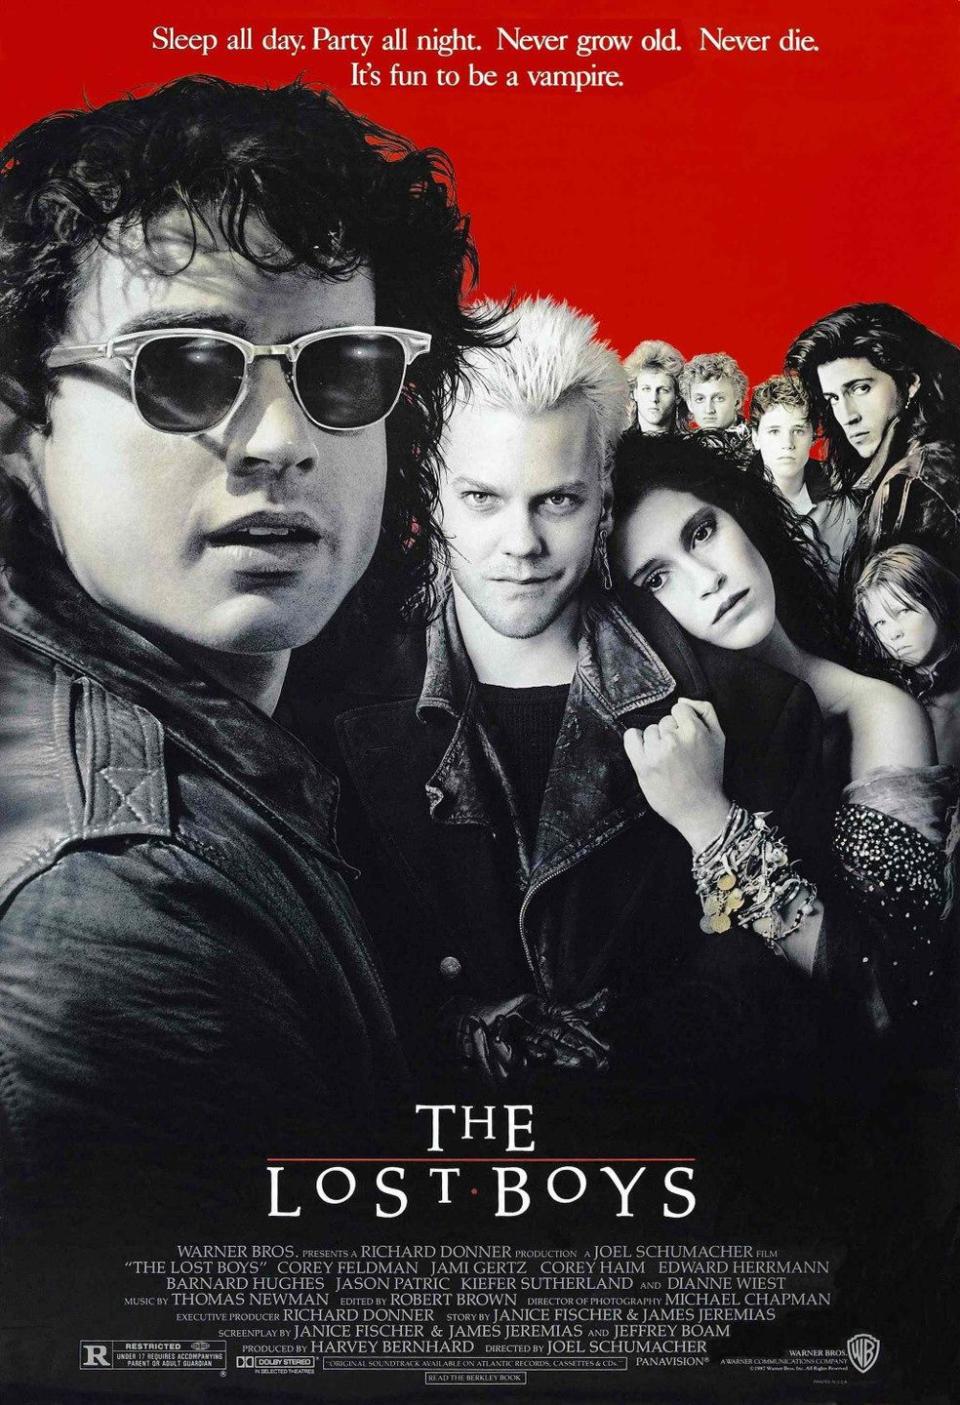 14) The Lost Boys